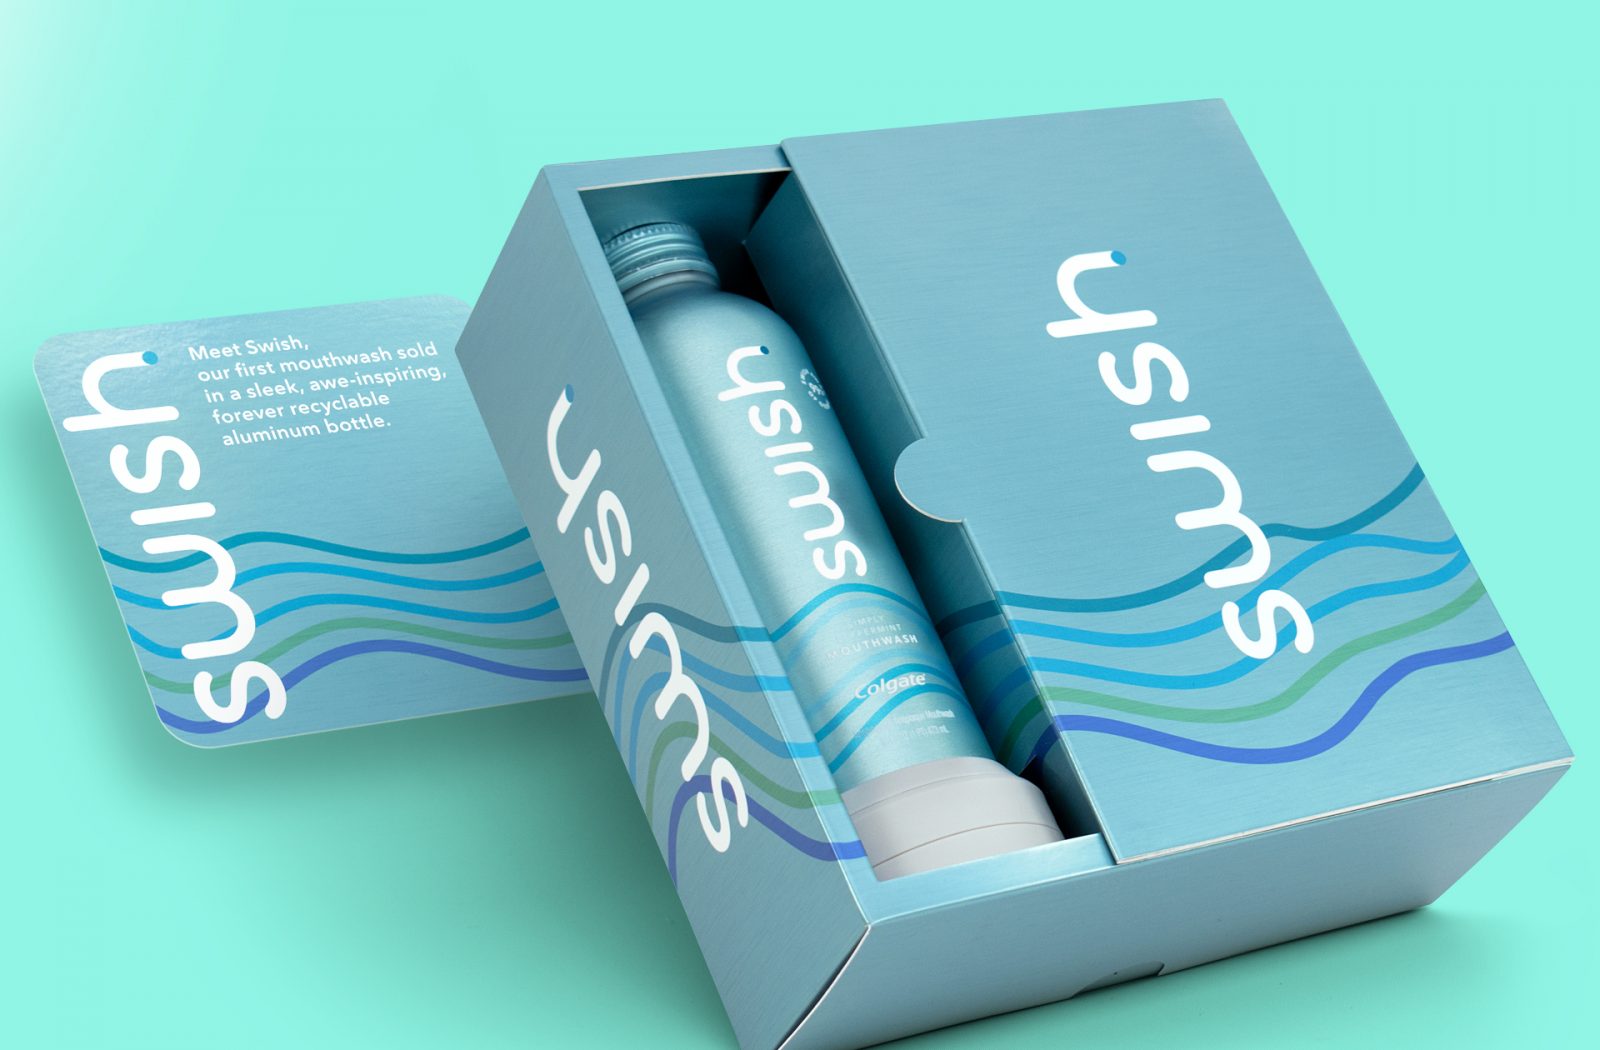 A photograph of a Swish Colgate Mouthwash made with infinitely recyclable aluminum, showcasing a brand design agency’s Sustainable Packaging Design services.